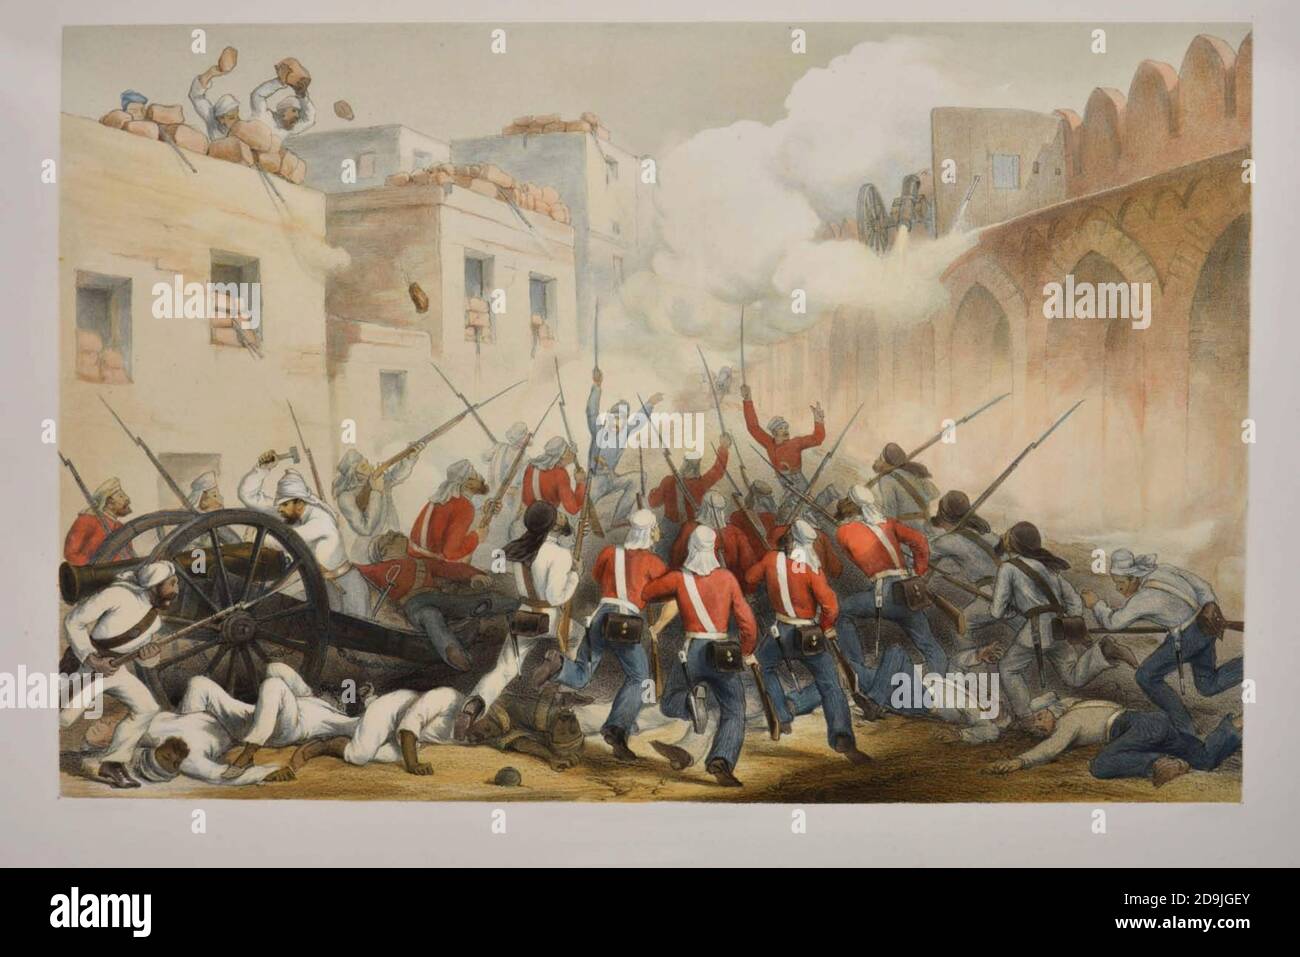 The Storming of Delhi Lithographie aus dem Buch Campaign in India 1857-58 Illustrating the Military Operations before Delhi ; 26 handkolorierte lithographierte Platten. Von George Francklin Atkinson Published by Day & Son Lithographers to the Queen in 1859 Stockfoto